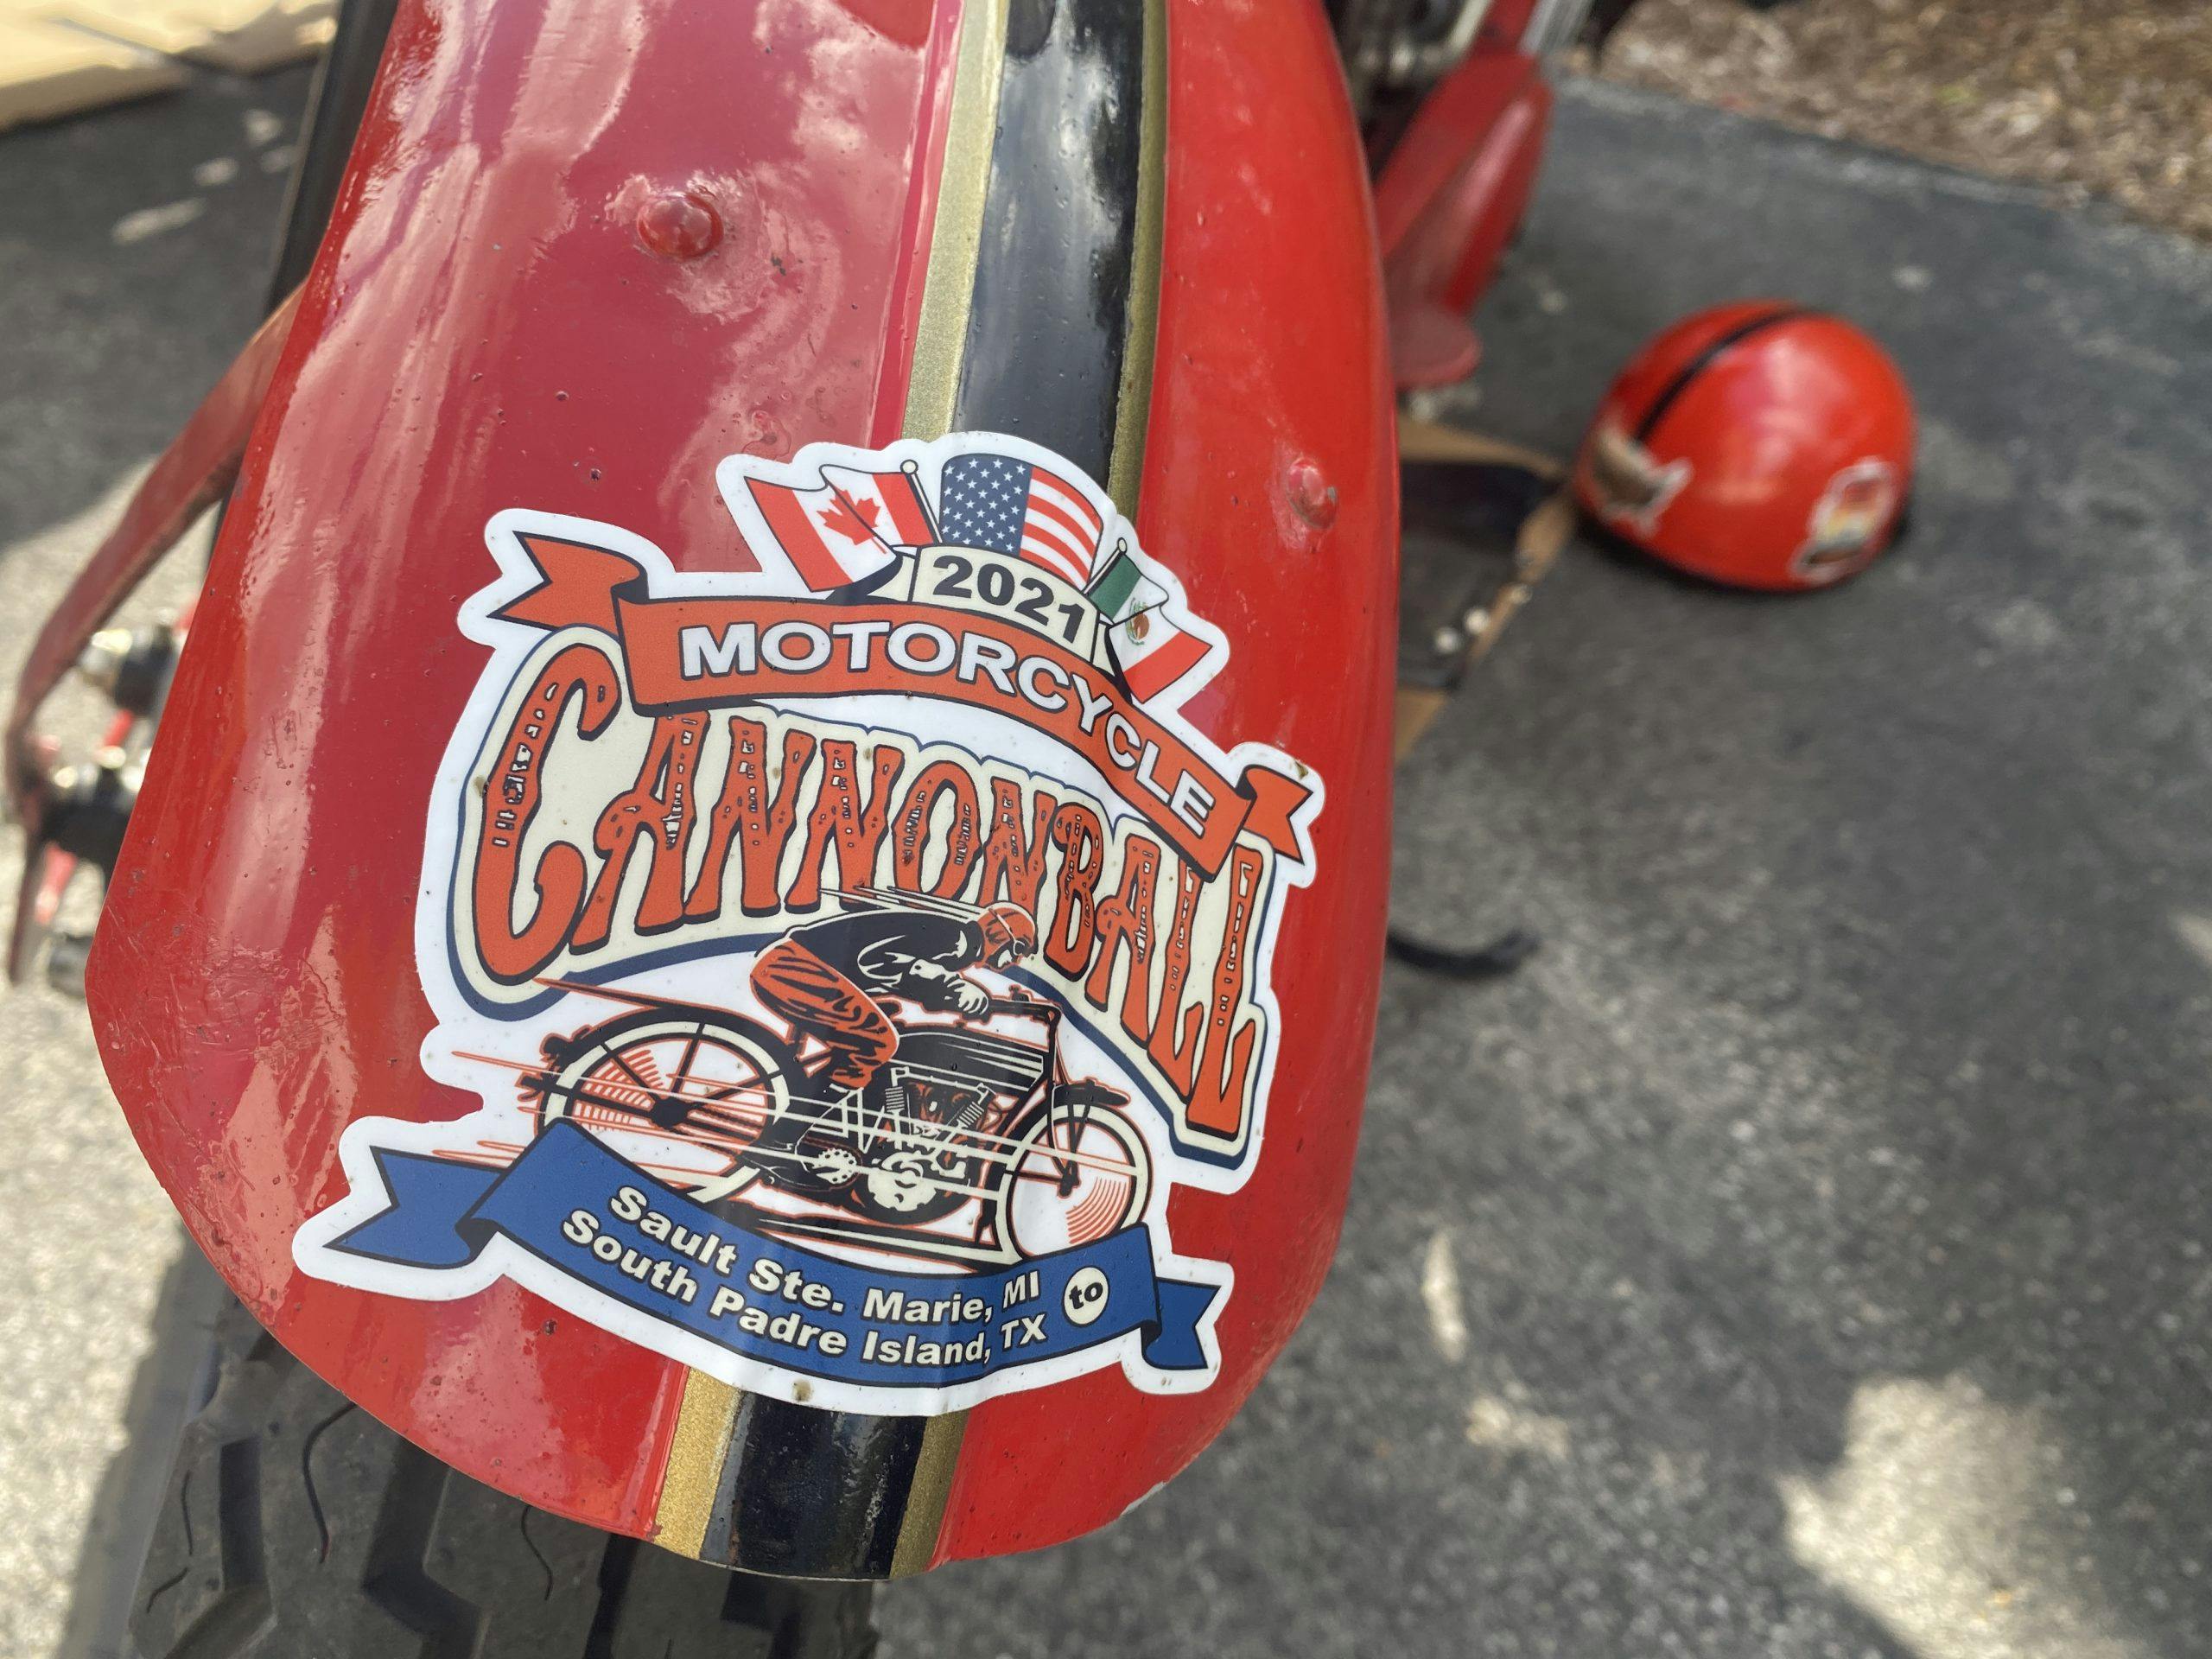 Motorcycle Cannonball decal